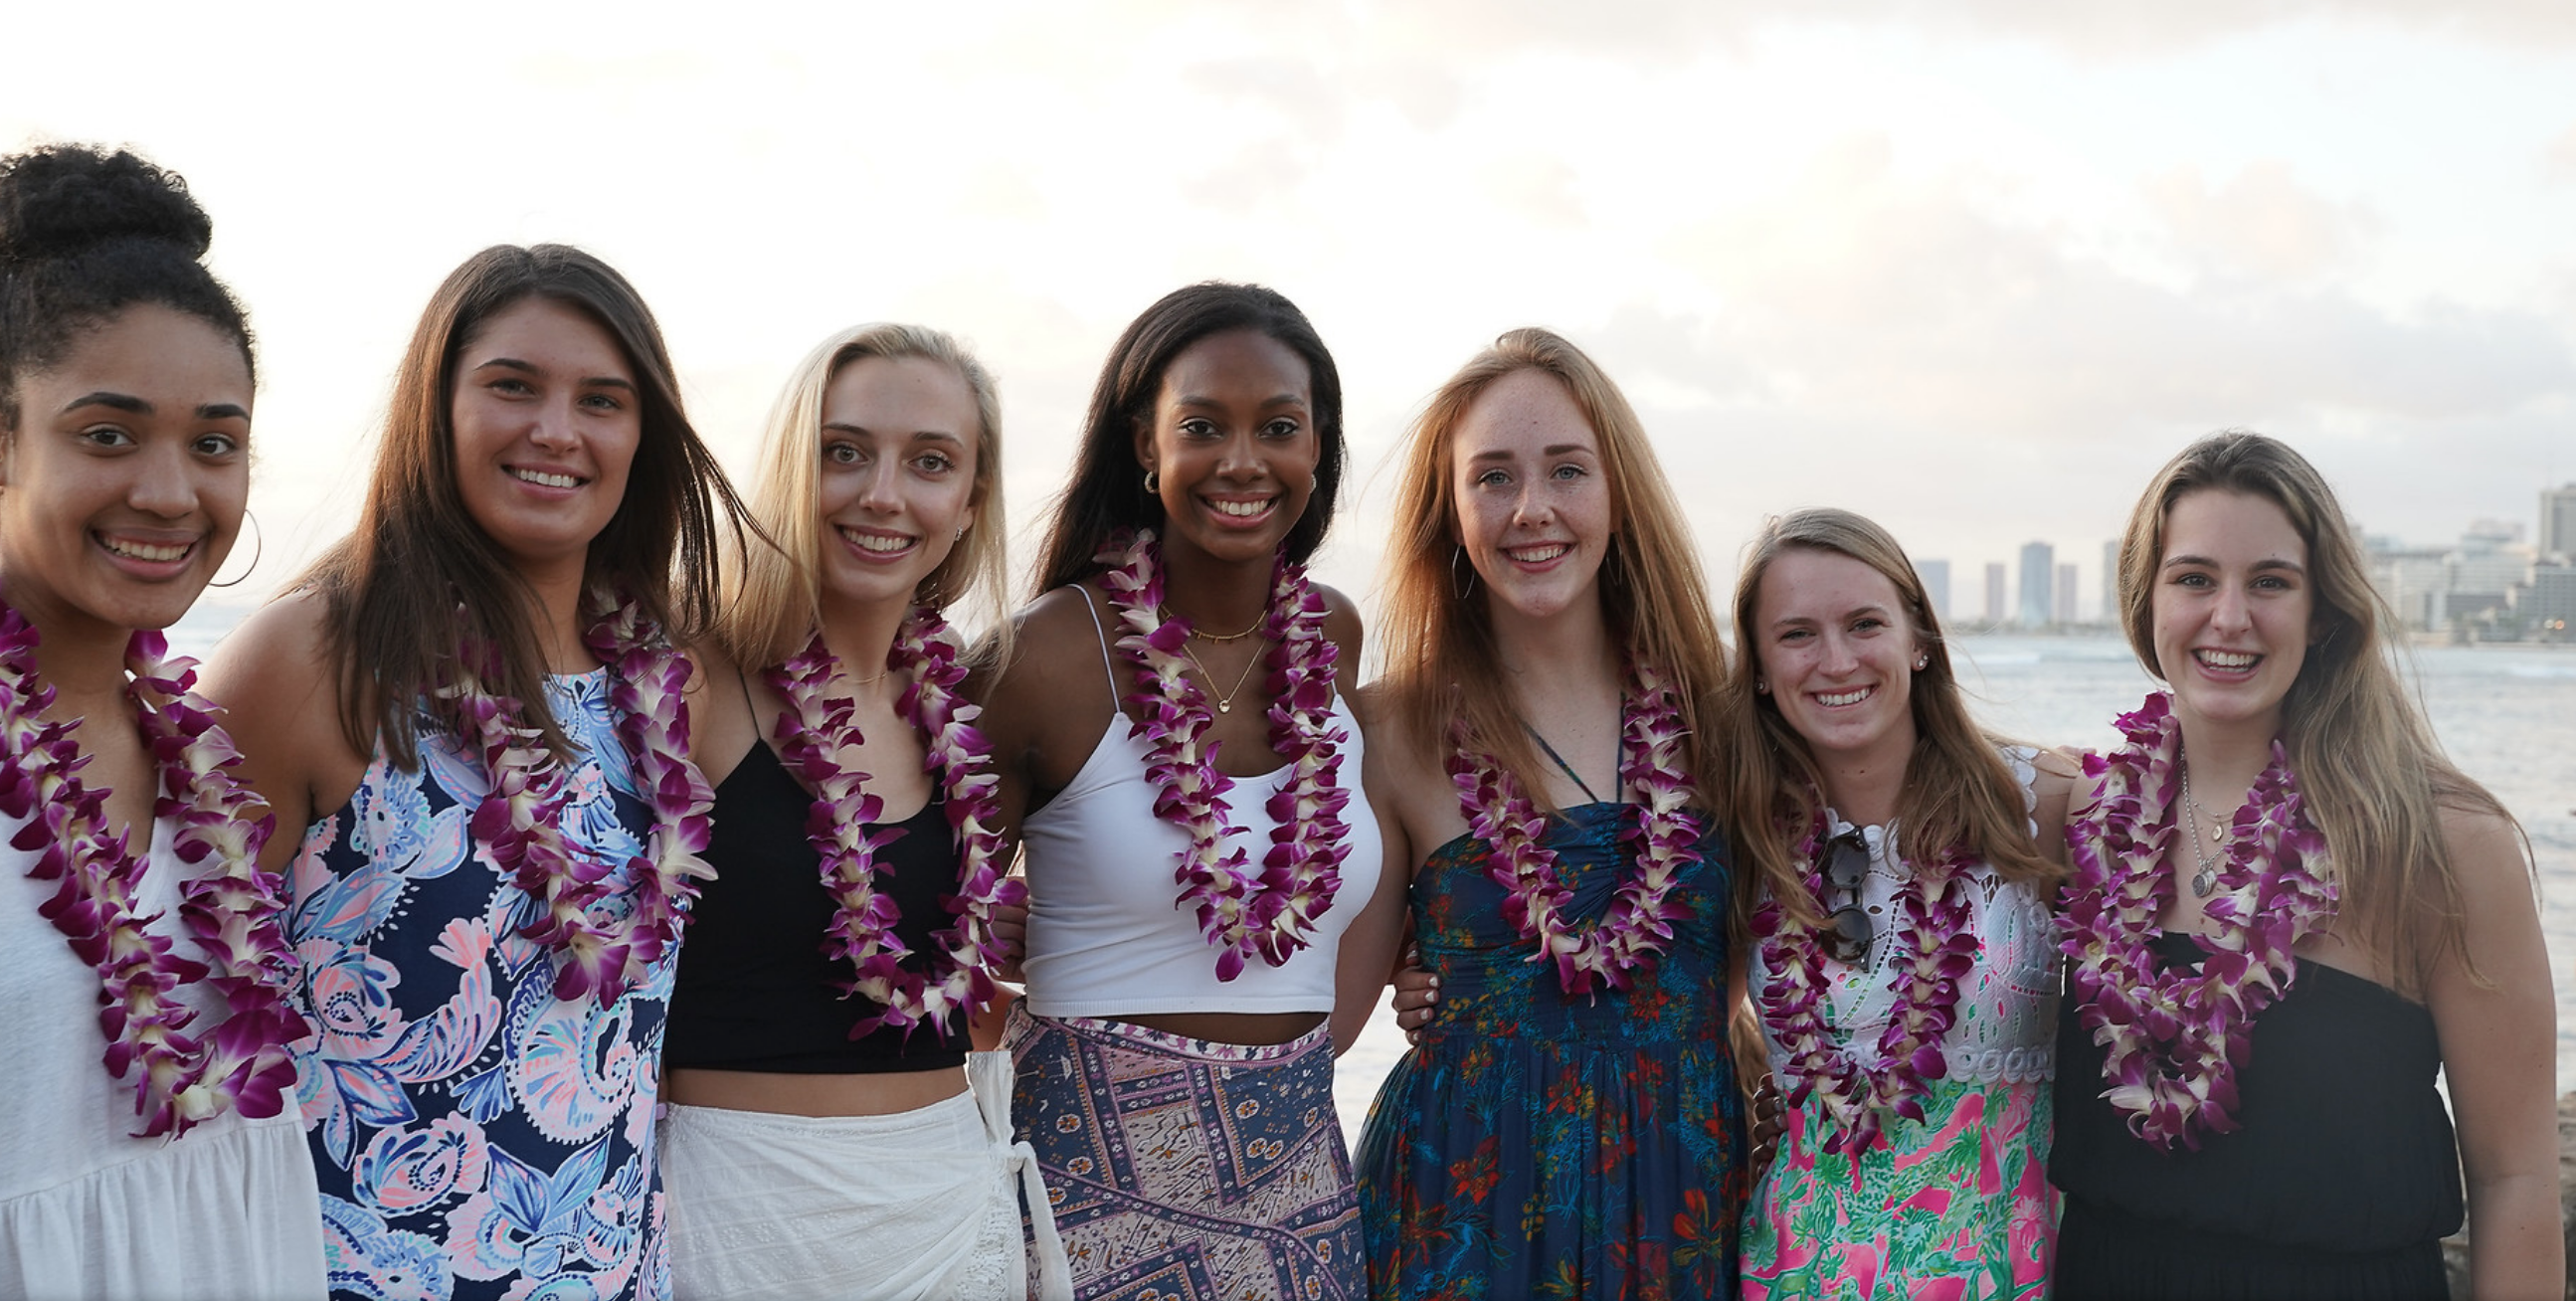 In Hawaii, Liz Satter poses with some of her teammates.